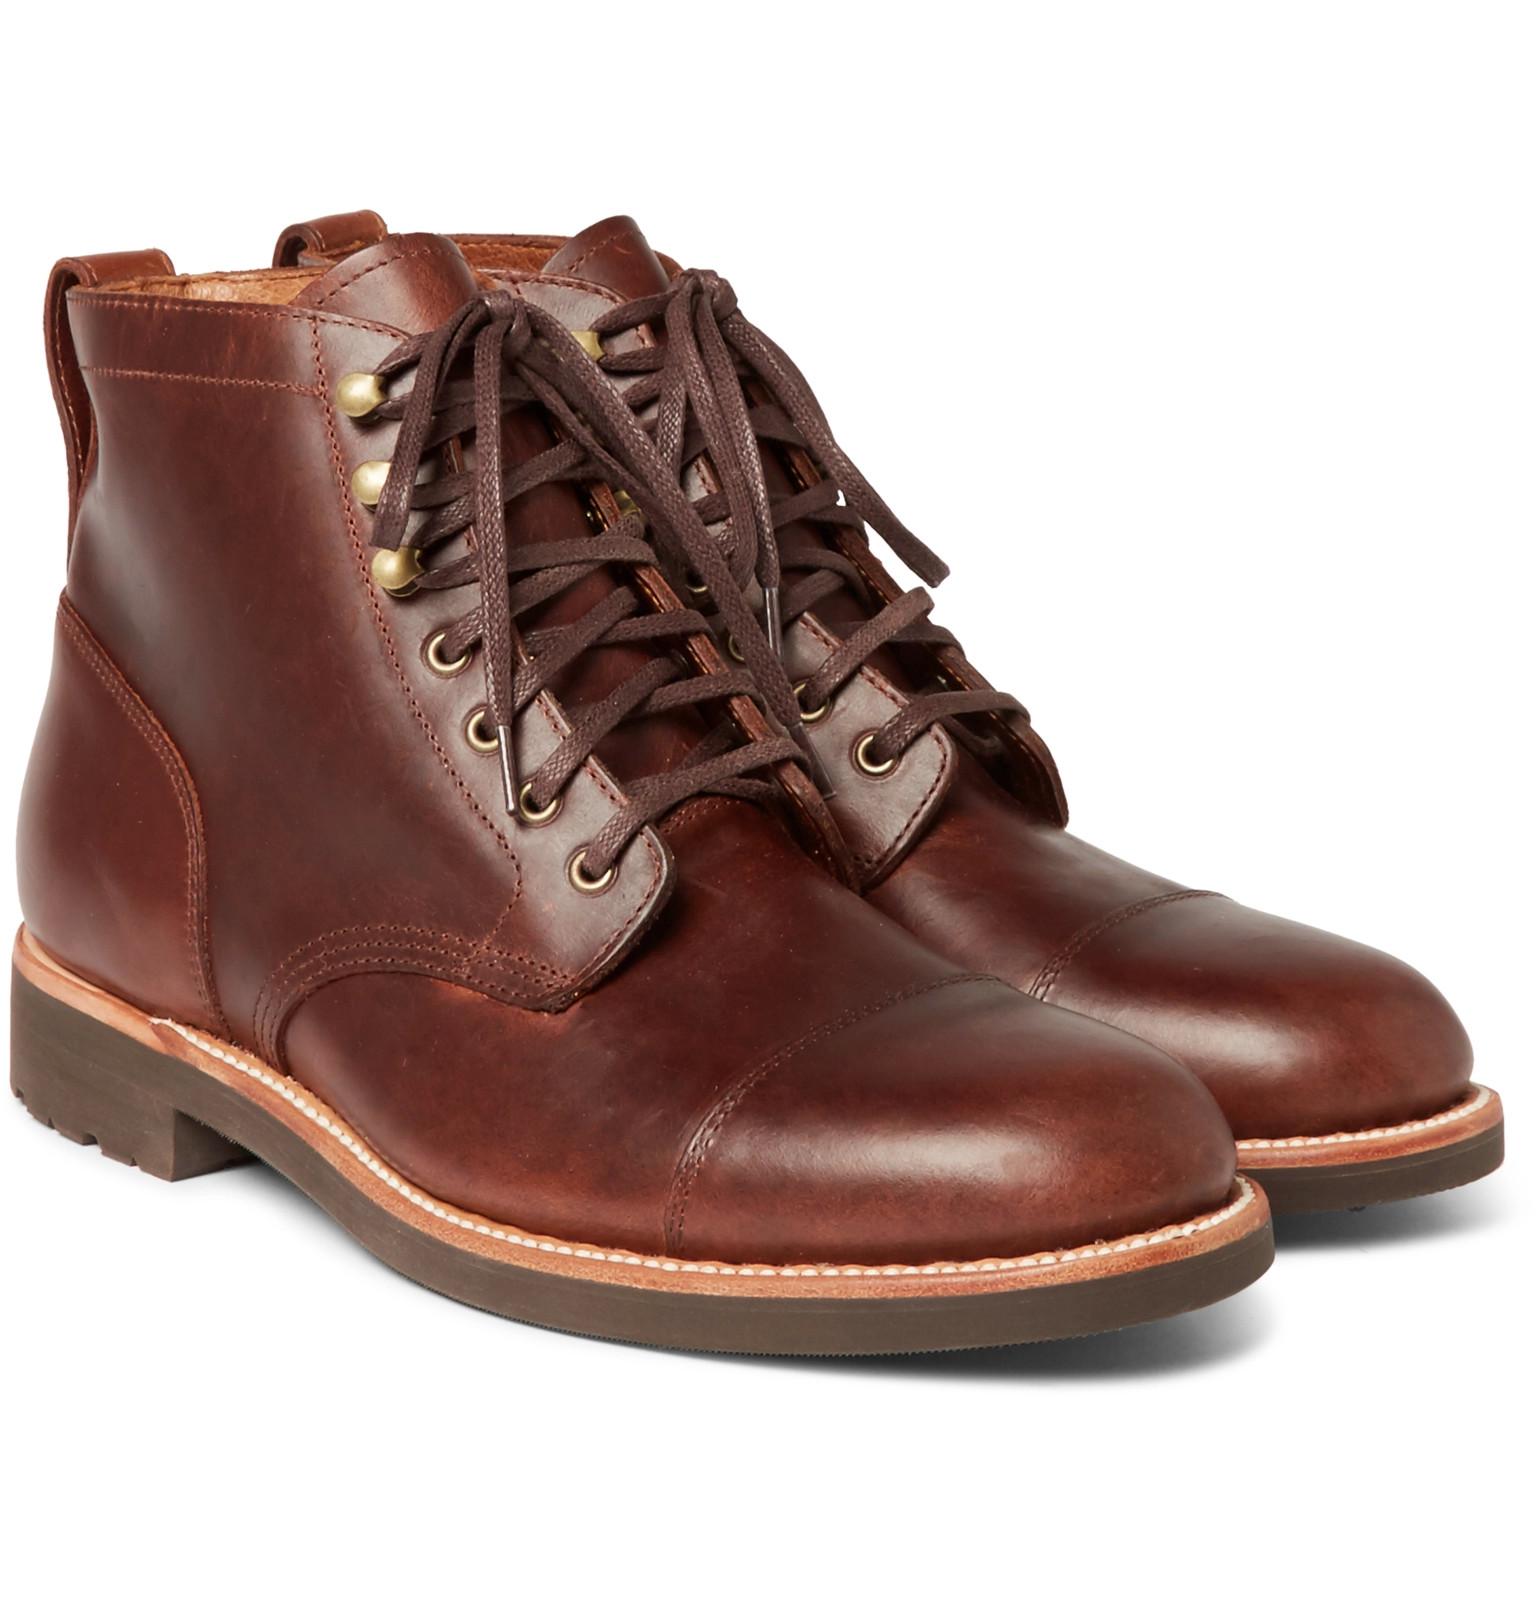 Lyst J.crew Kenton Leather Pacer Boots in Brown for Men